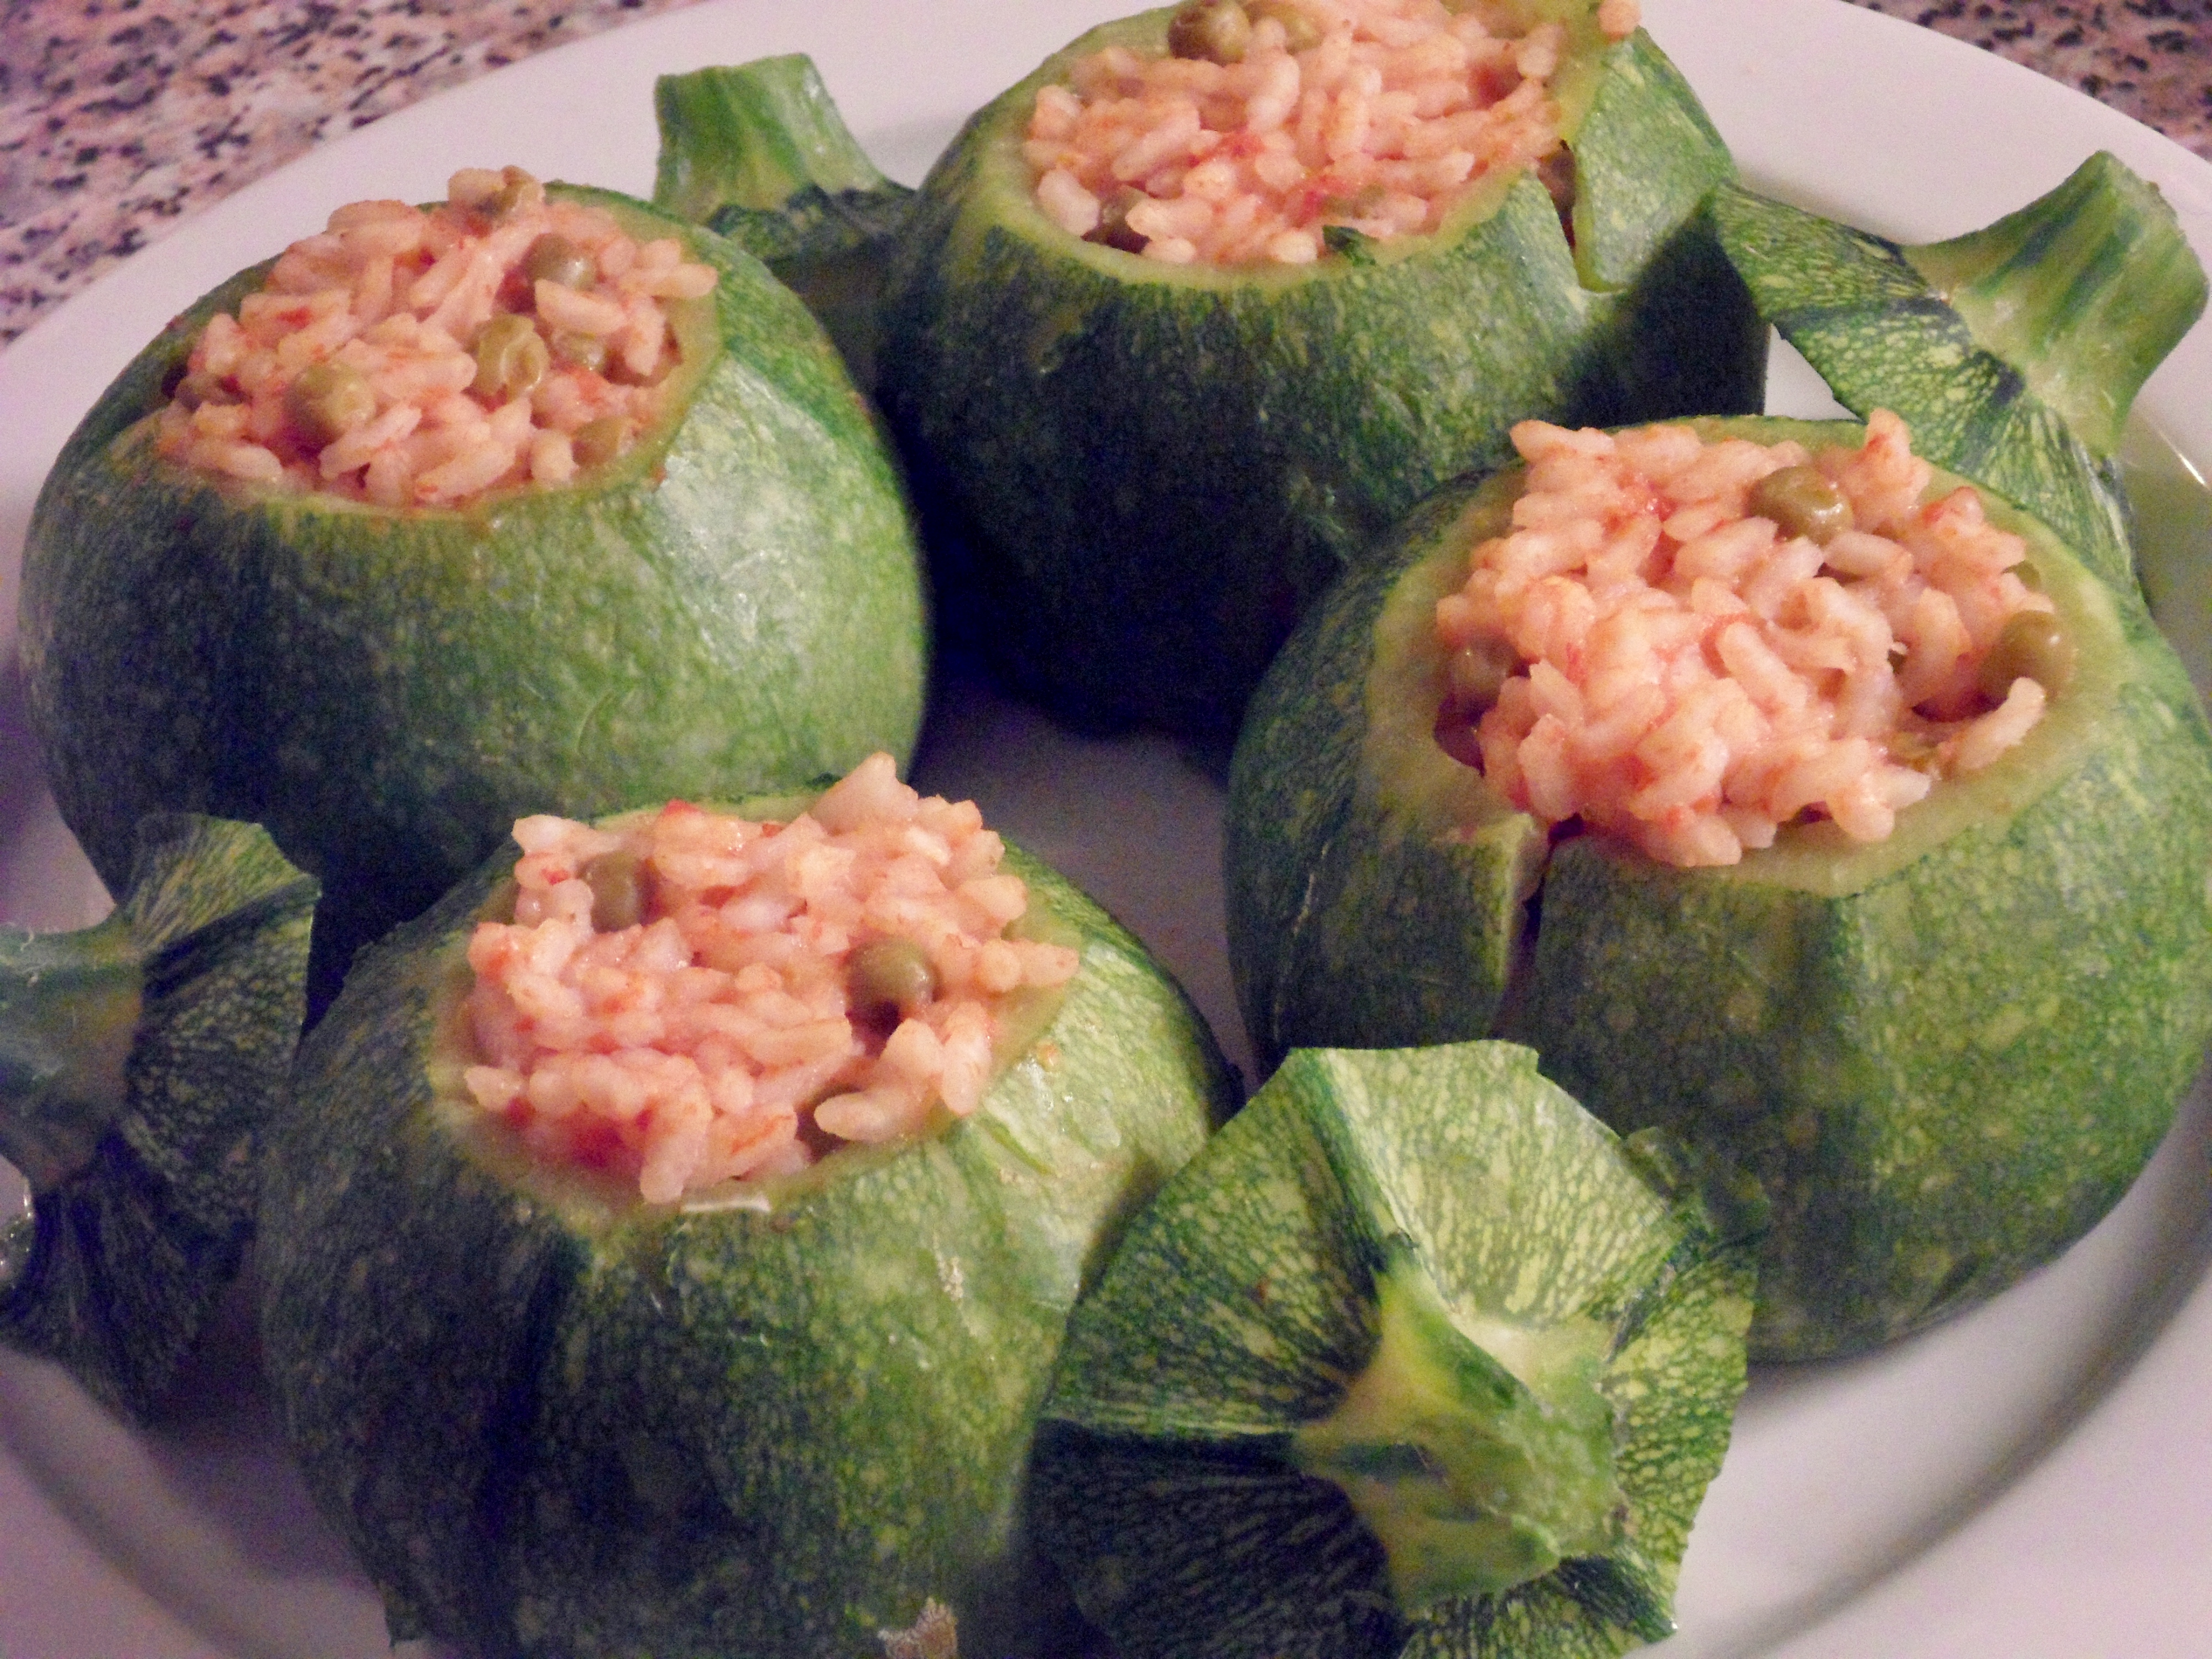 Round courgettes stuffed with rice and peas